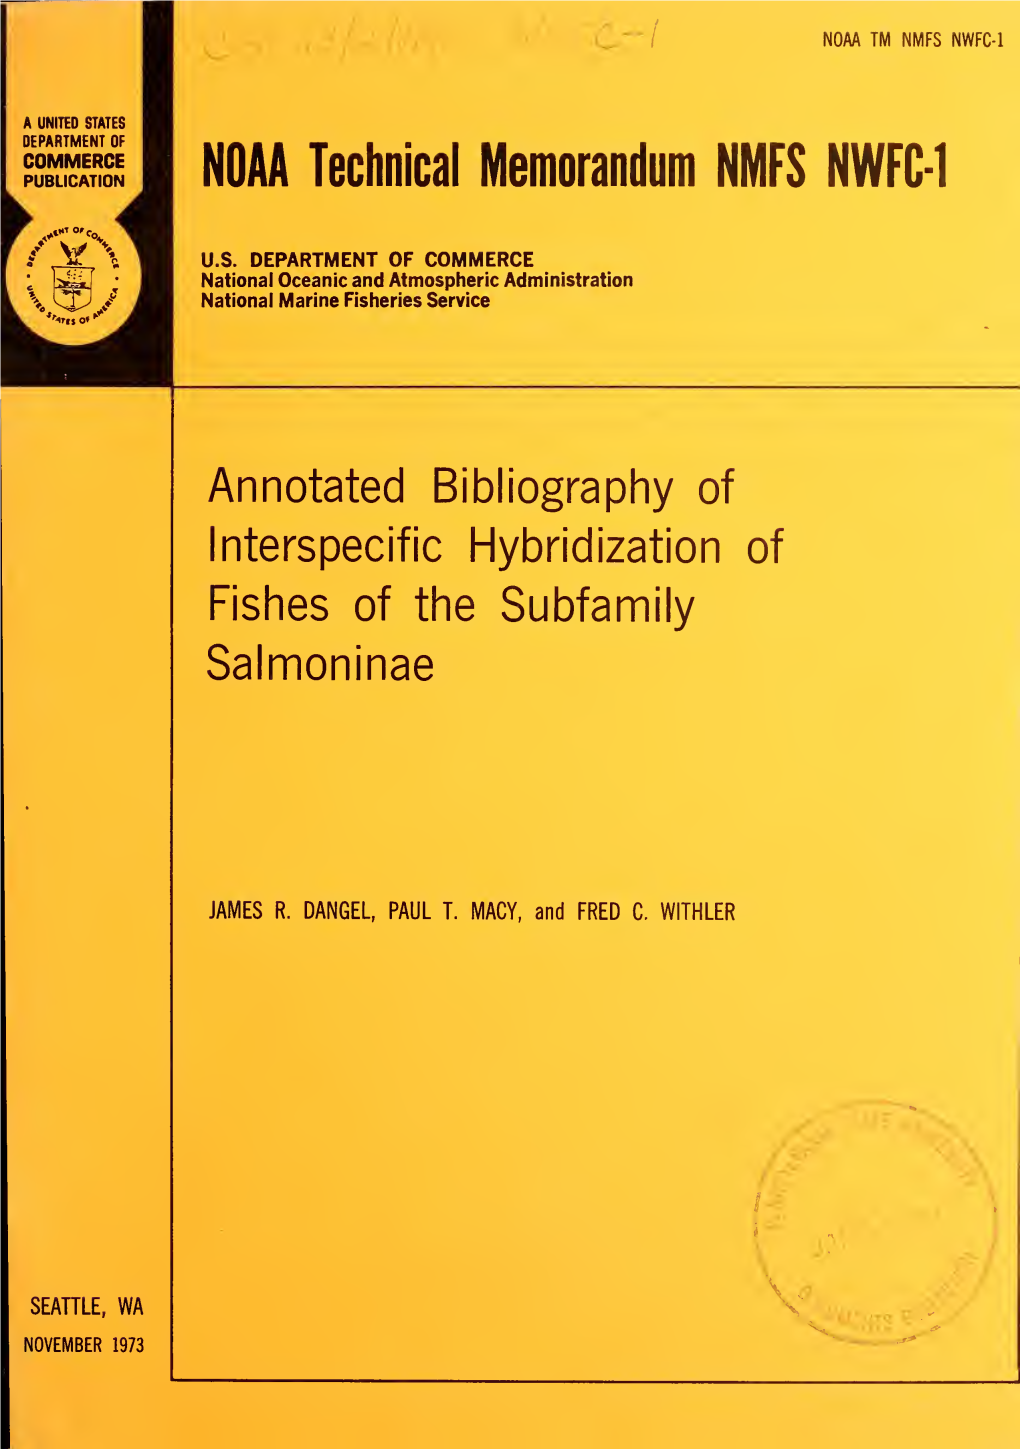 Annotated Bibliography of Interspecific Hybridization of Fishes of the Subfamily Salmoninae